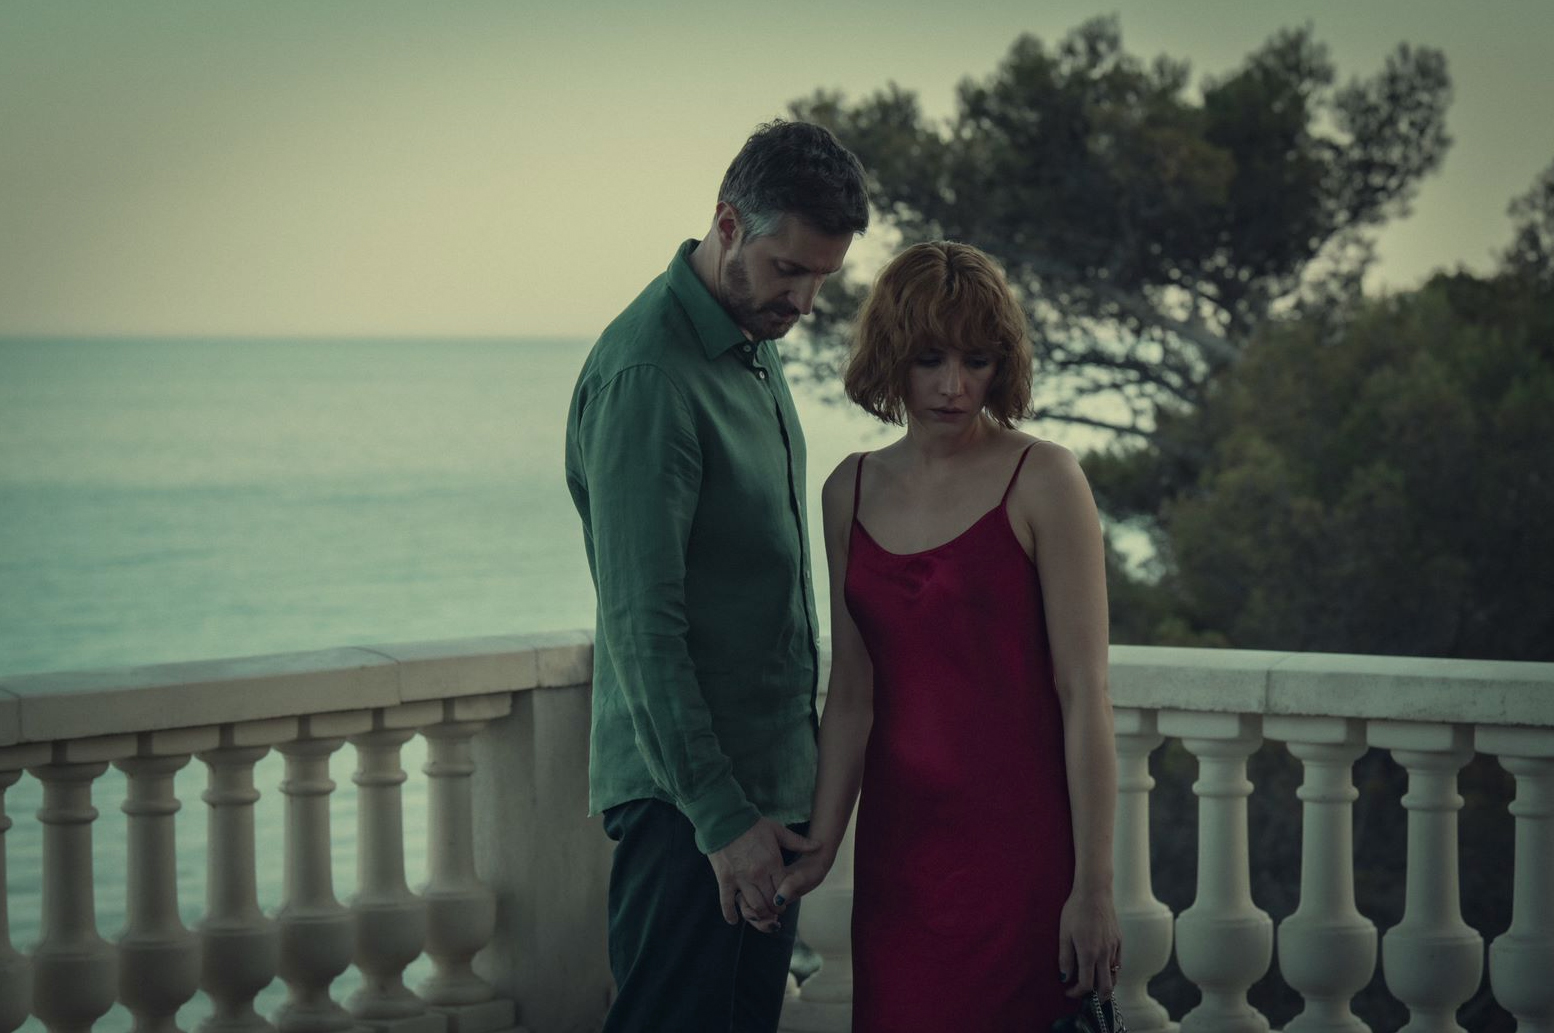 Boring is as good as this erotic drama gets Netflixs Obsession reviewed The Spectator